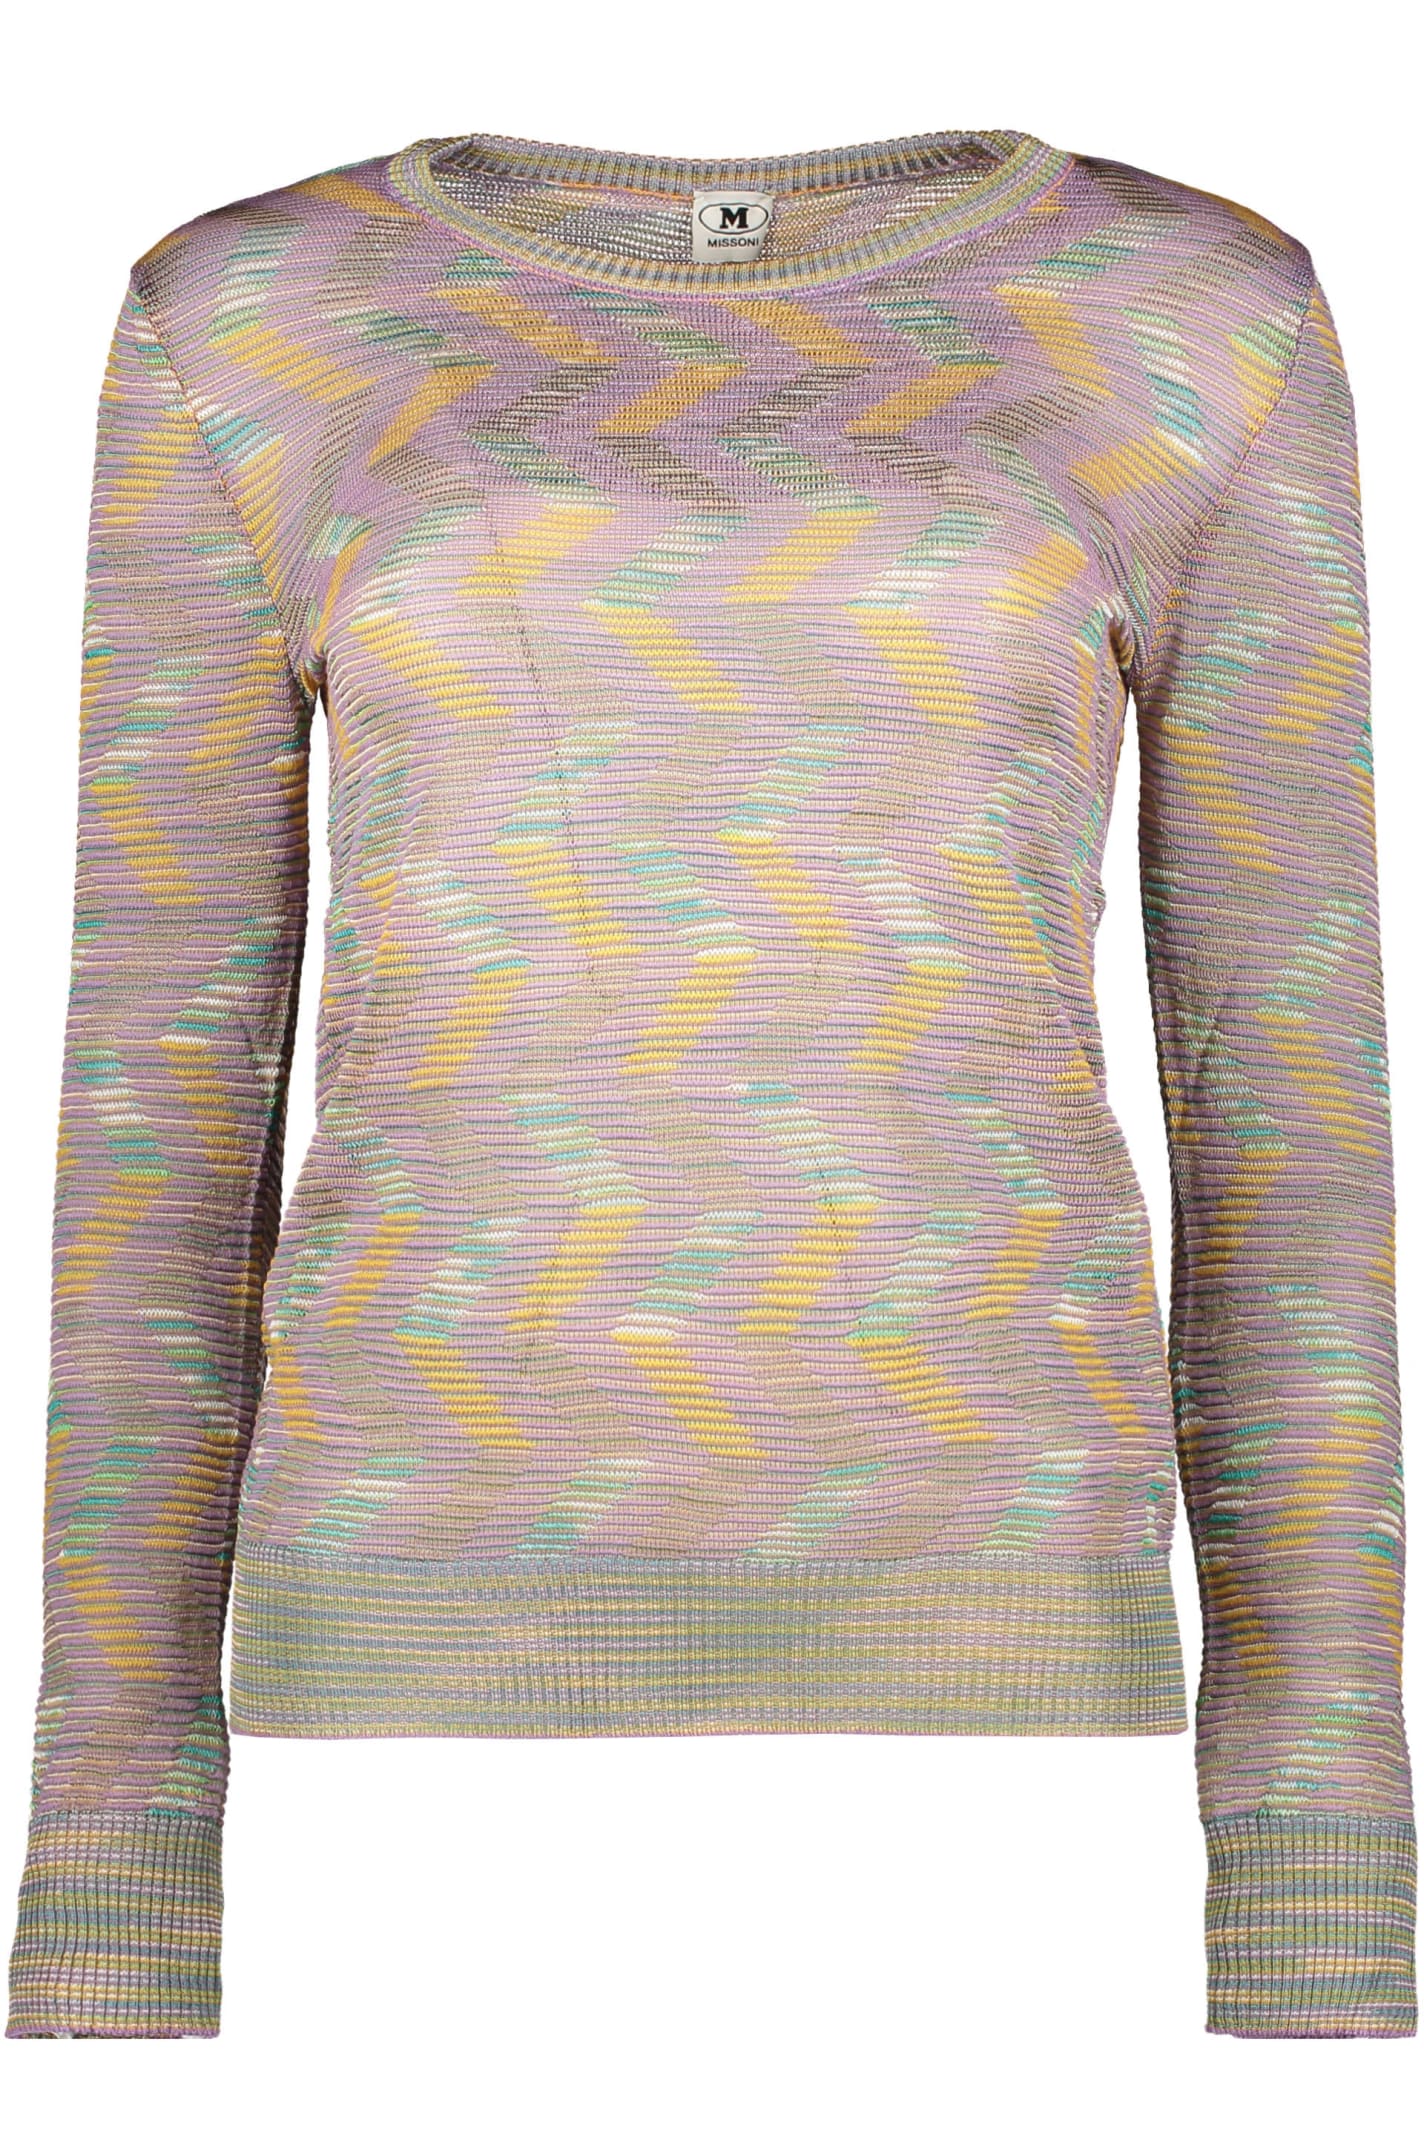 M Missoni Long Sleeve Crew-neck Jumper In Lilac